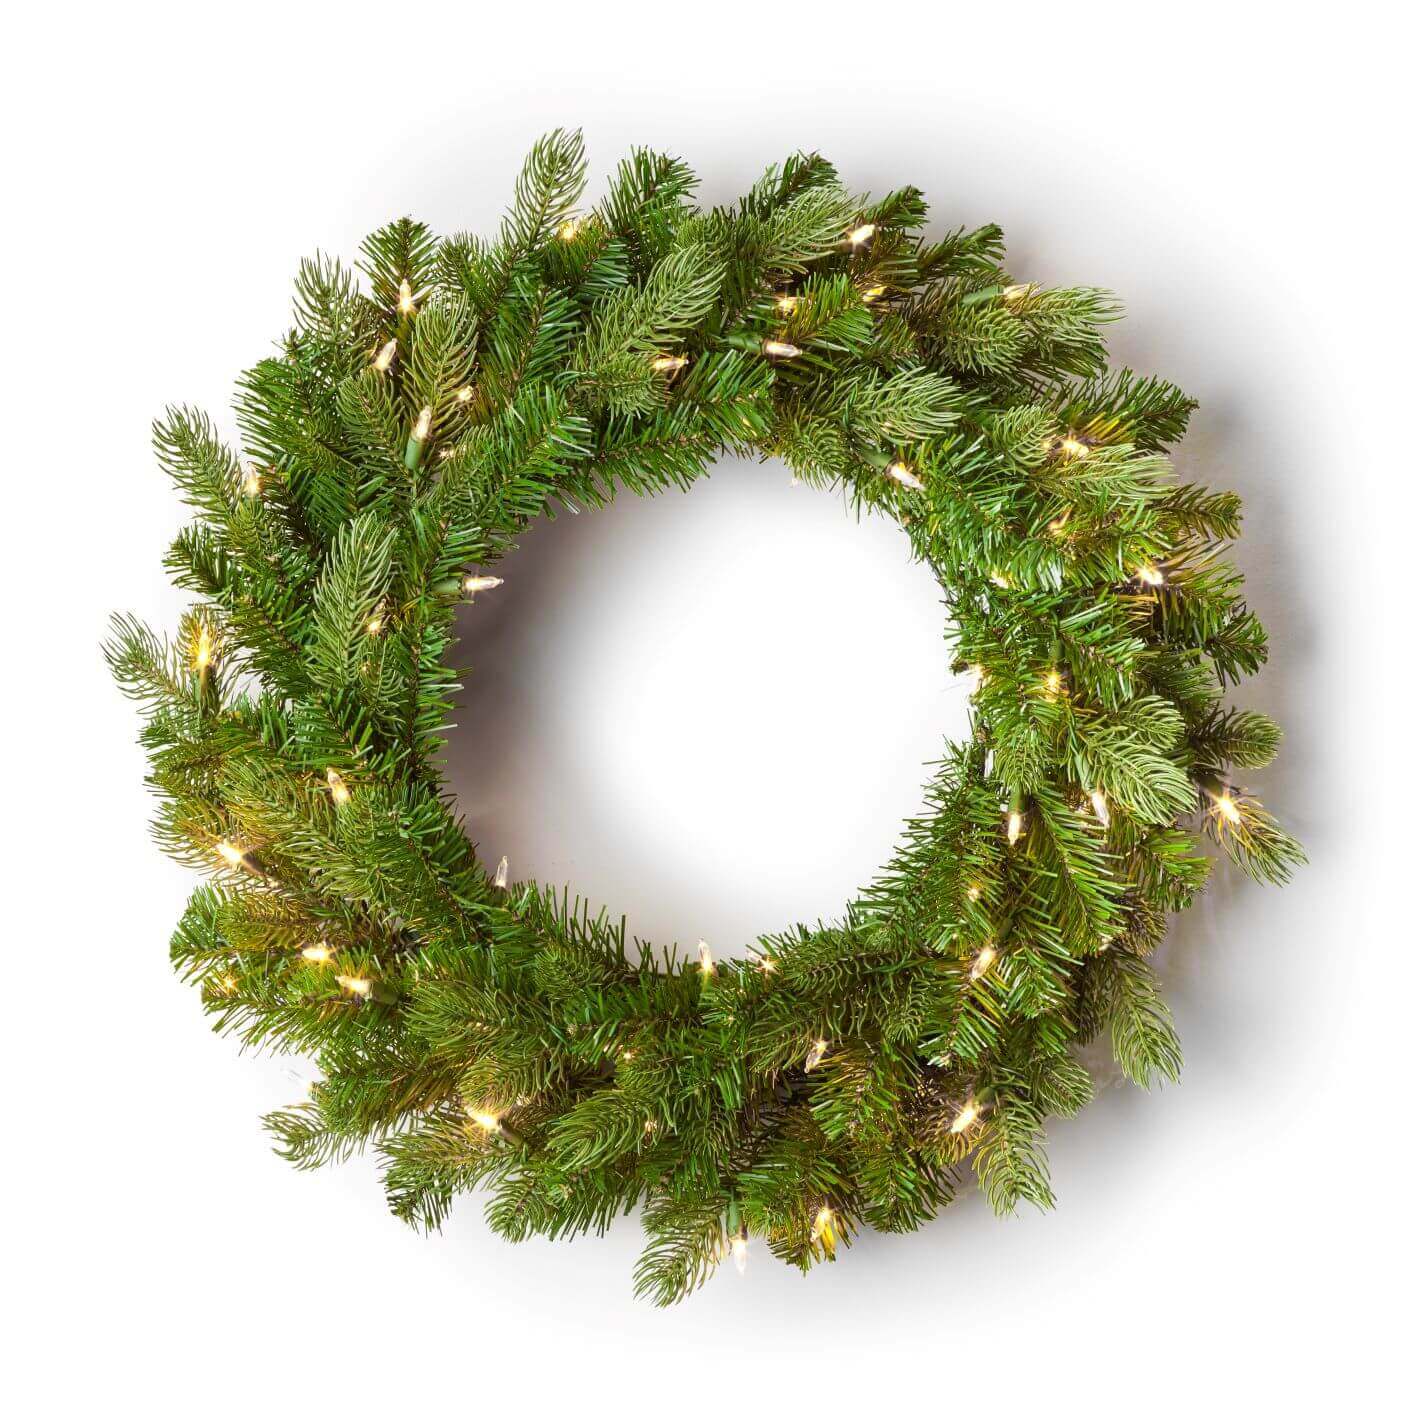 King of Christmas 24" Cypress Spruce Wreath with Warm White LED Lights (Battery Operated)